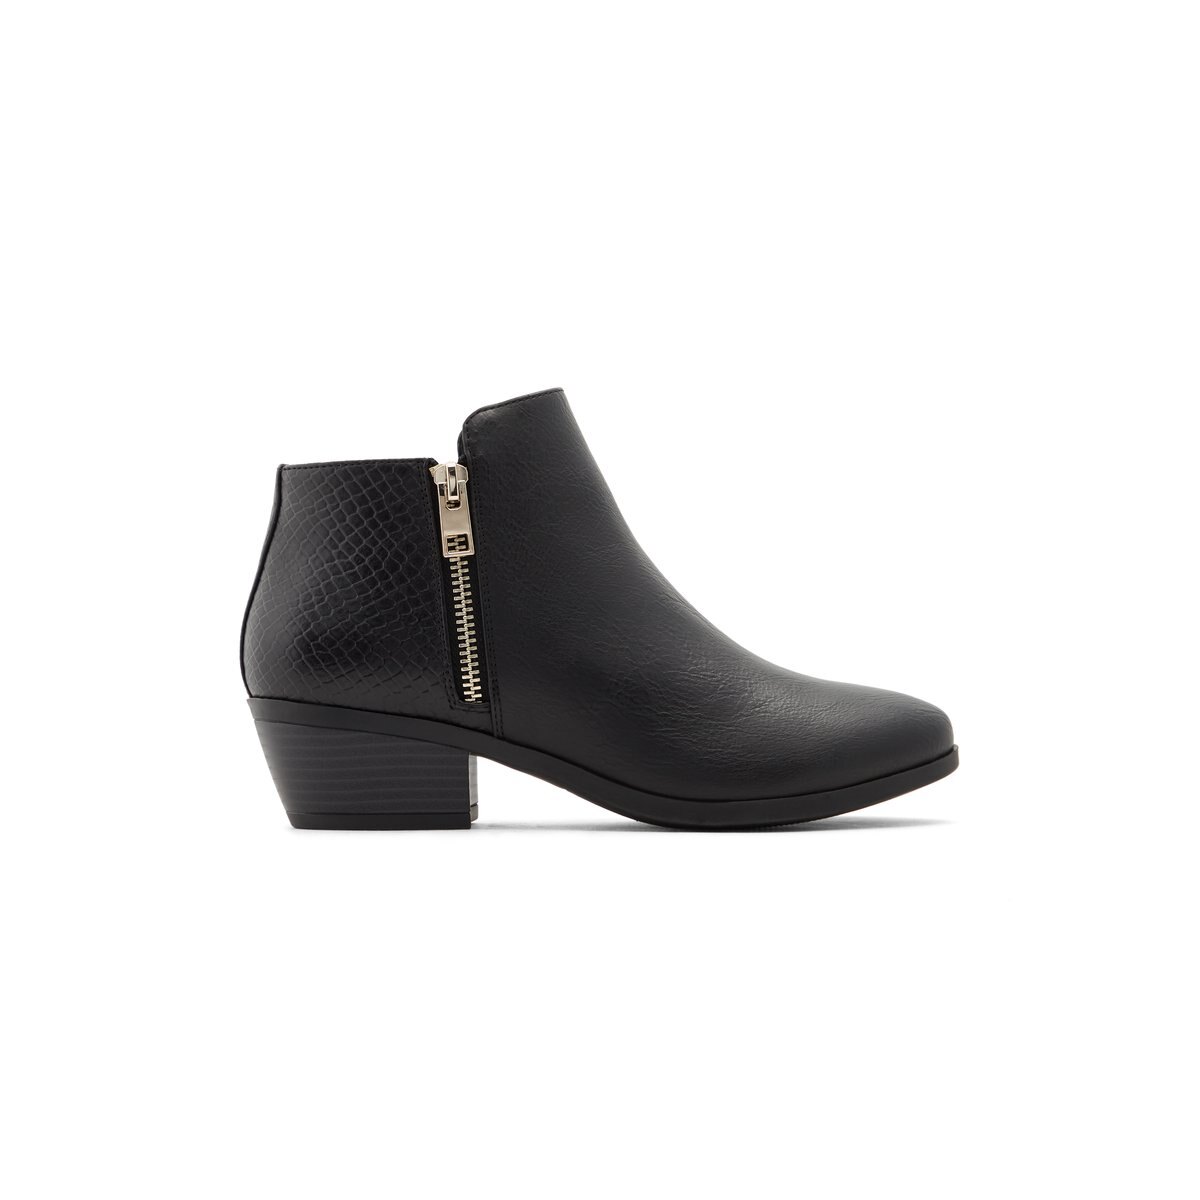 Clari Black Women's Ankle Boots | Call 